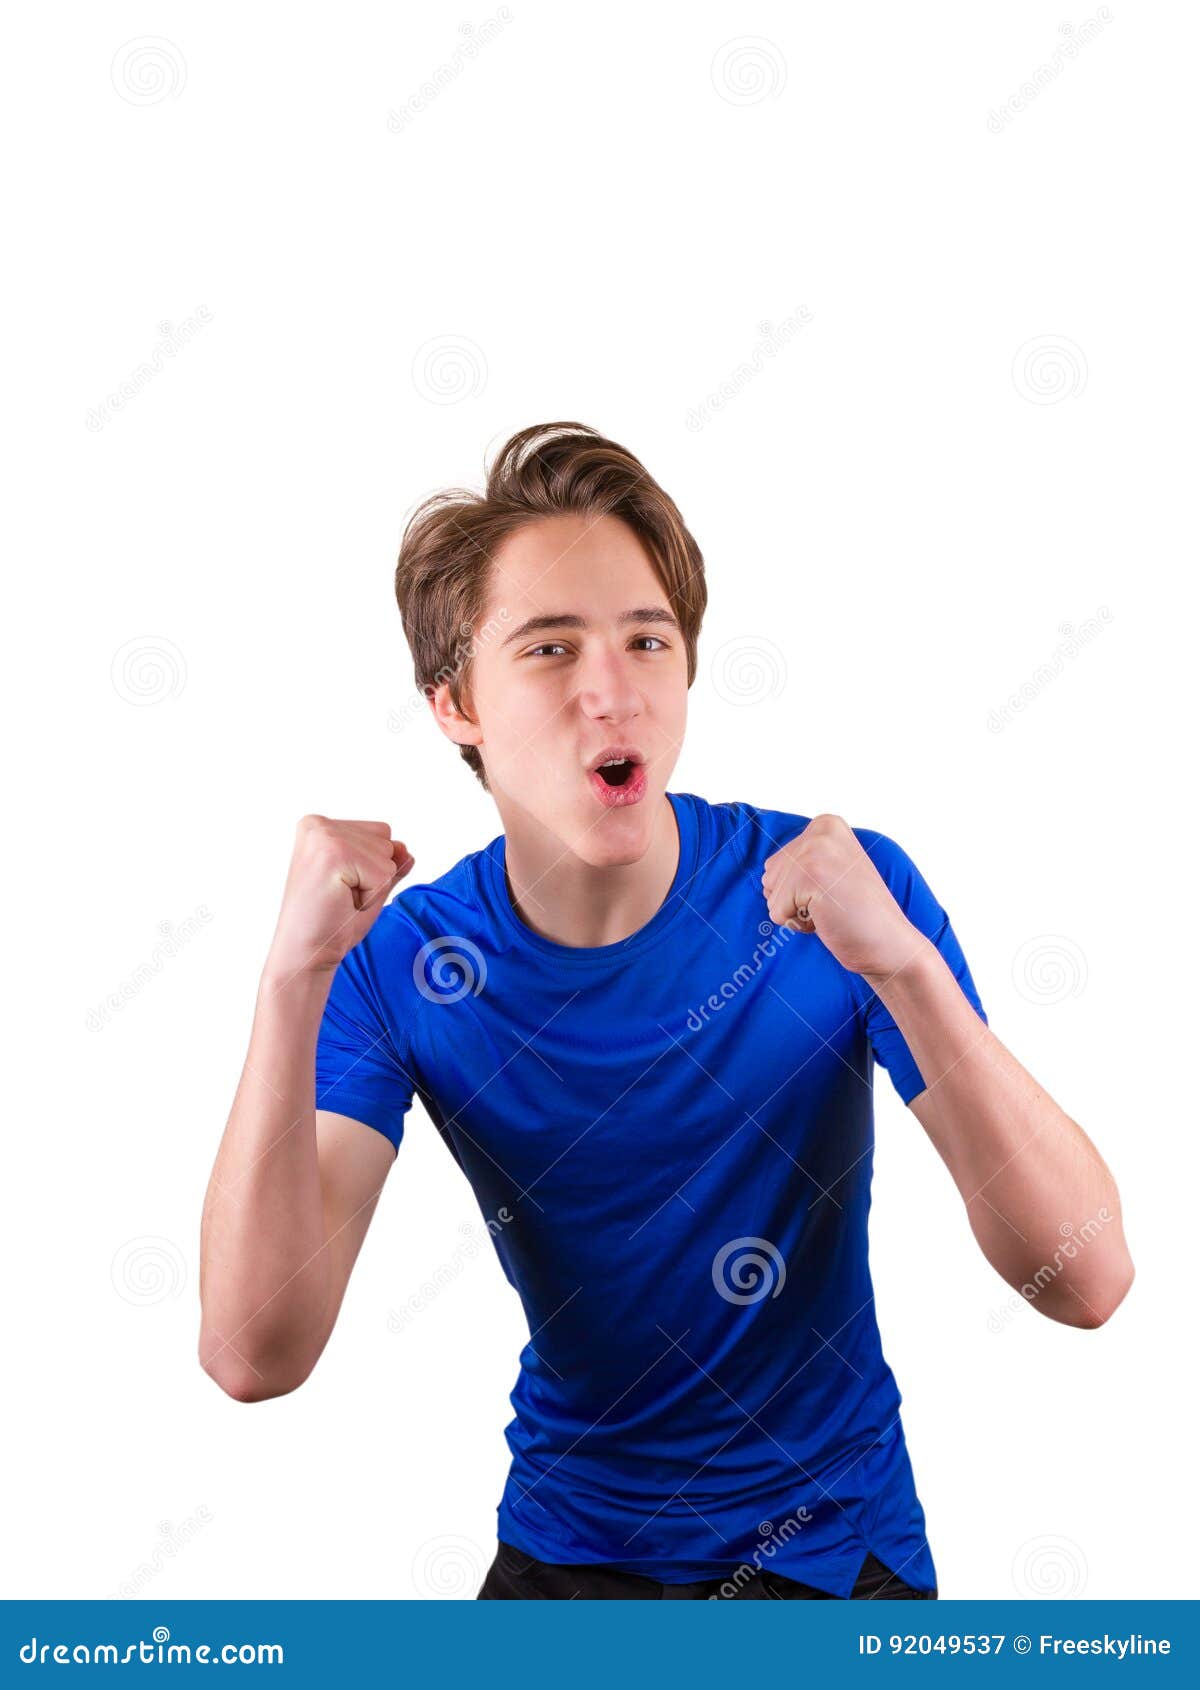 Teenager In Blue Tshirt Isolated On White Background